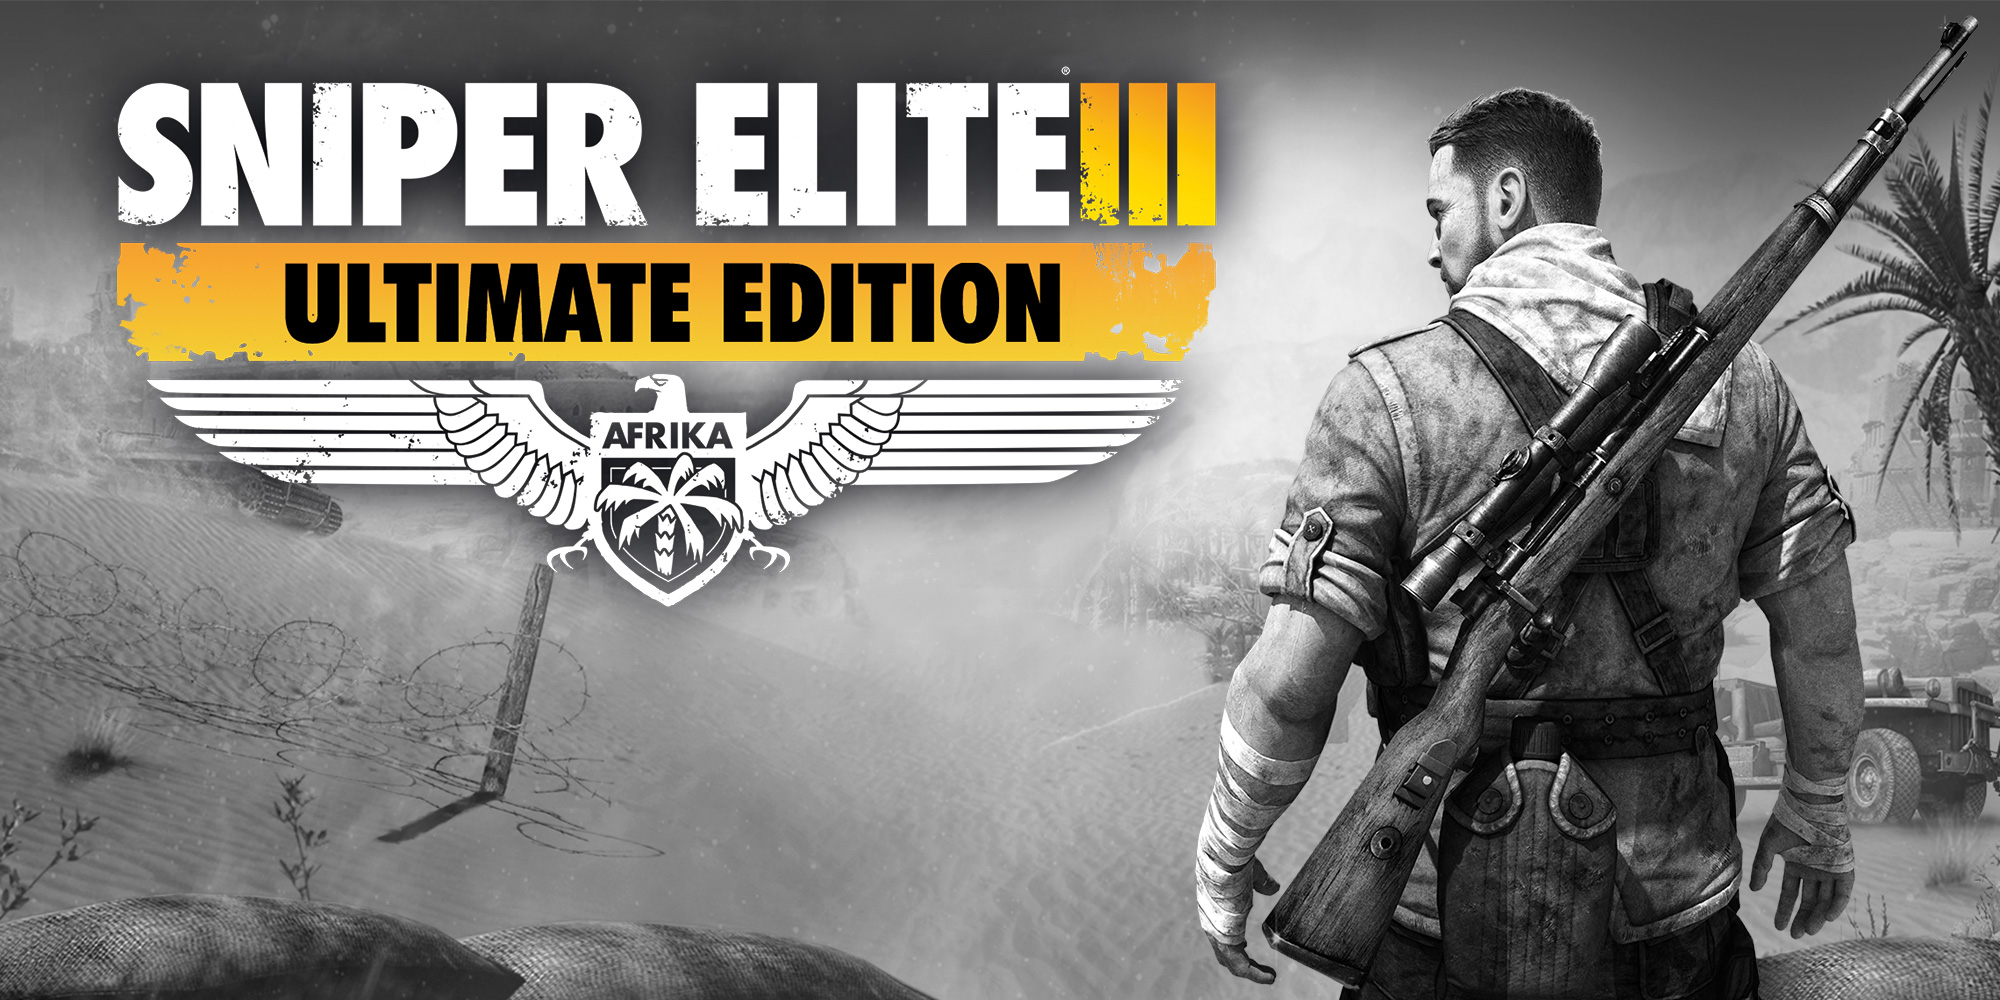 Sniper Elite 3 Ultimate Edition | Nintendo Switch games | Games 